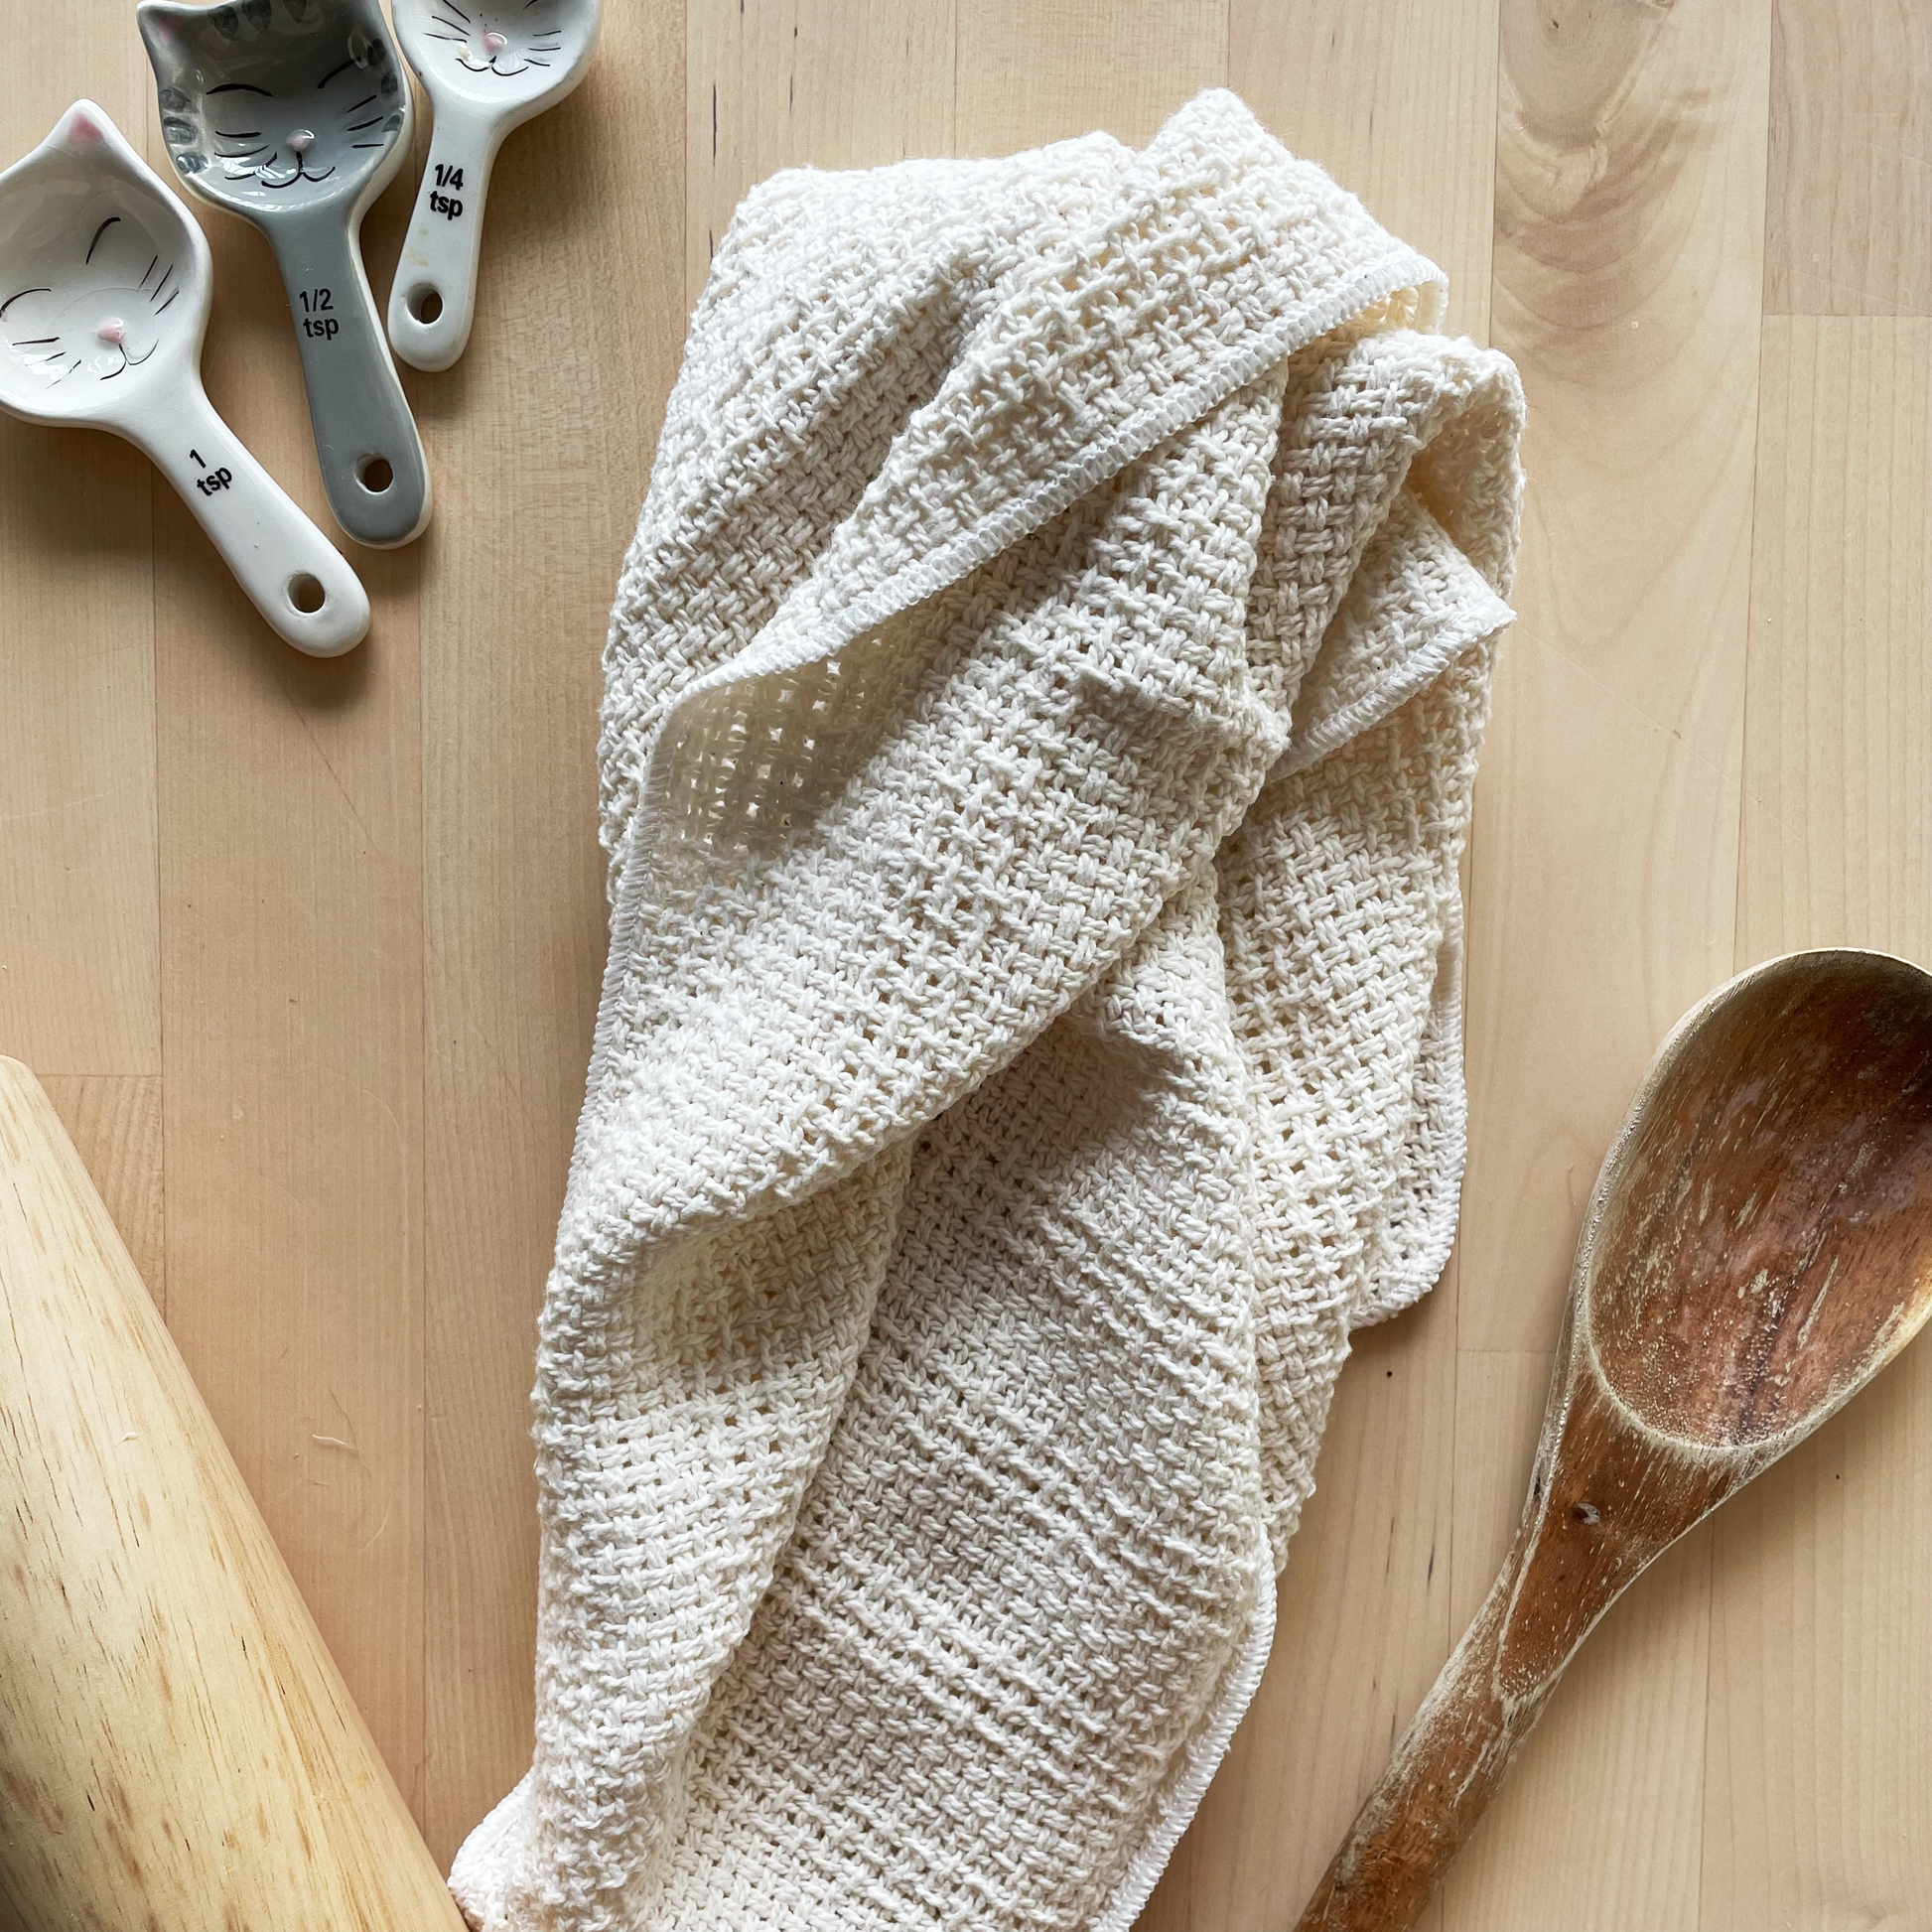 Made in the USA 100% Cotton Kitchen Towels